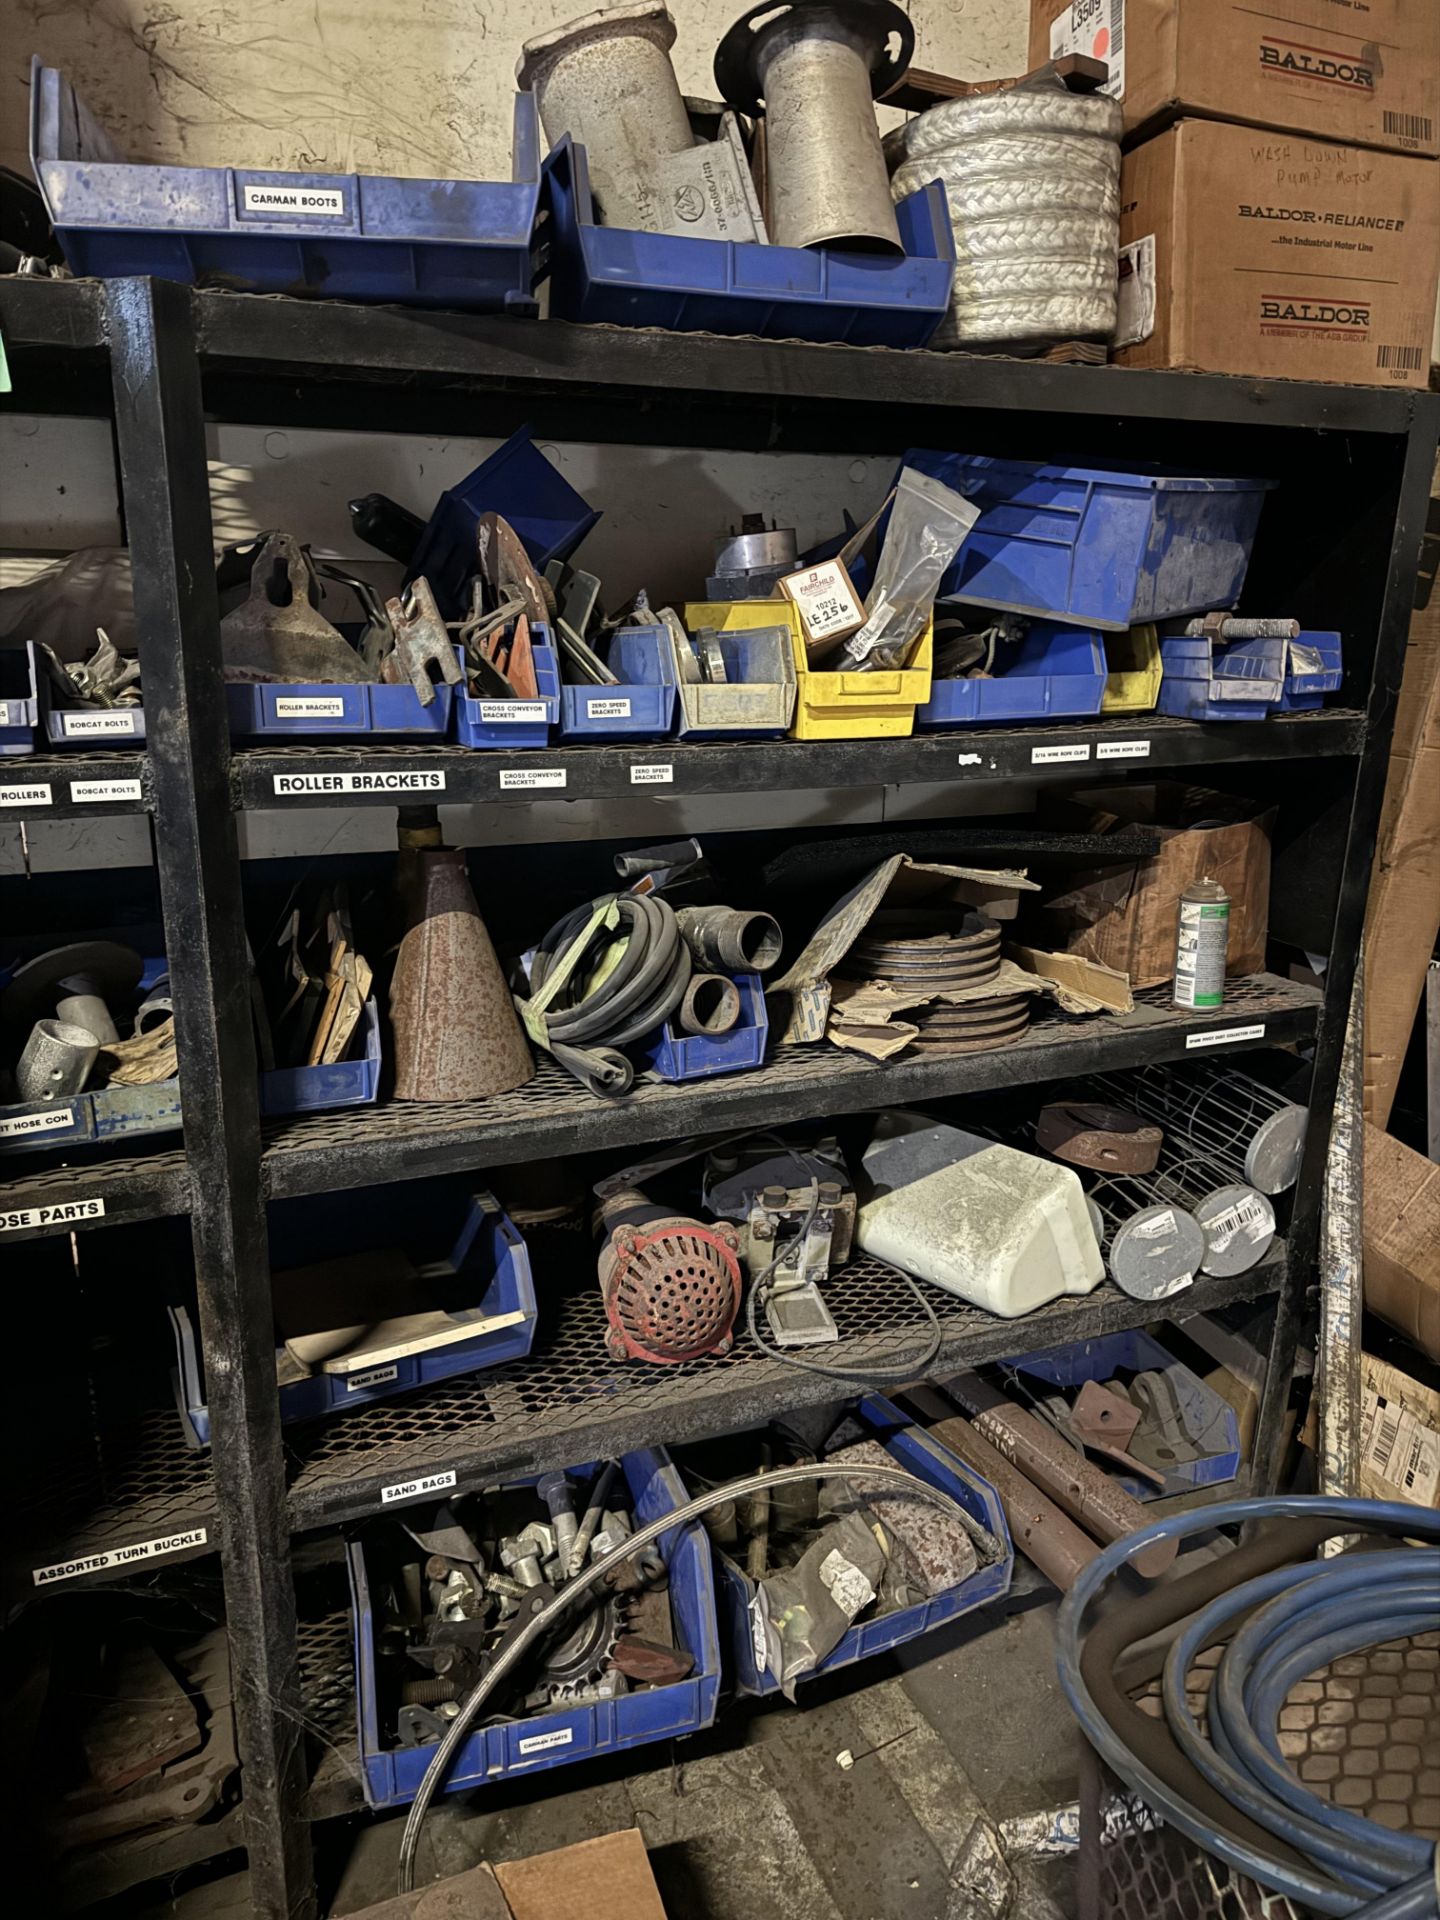 Shelving and Contents (All Photoed), Rigging/ Removal Fee - $2,150 - Image 6 of 7